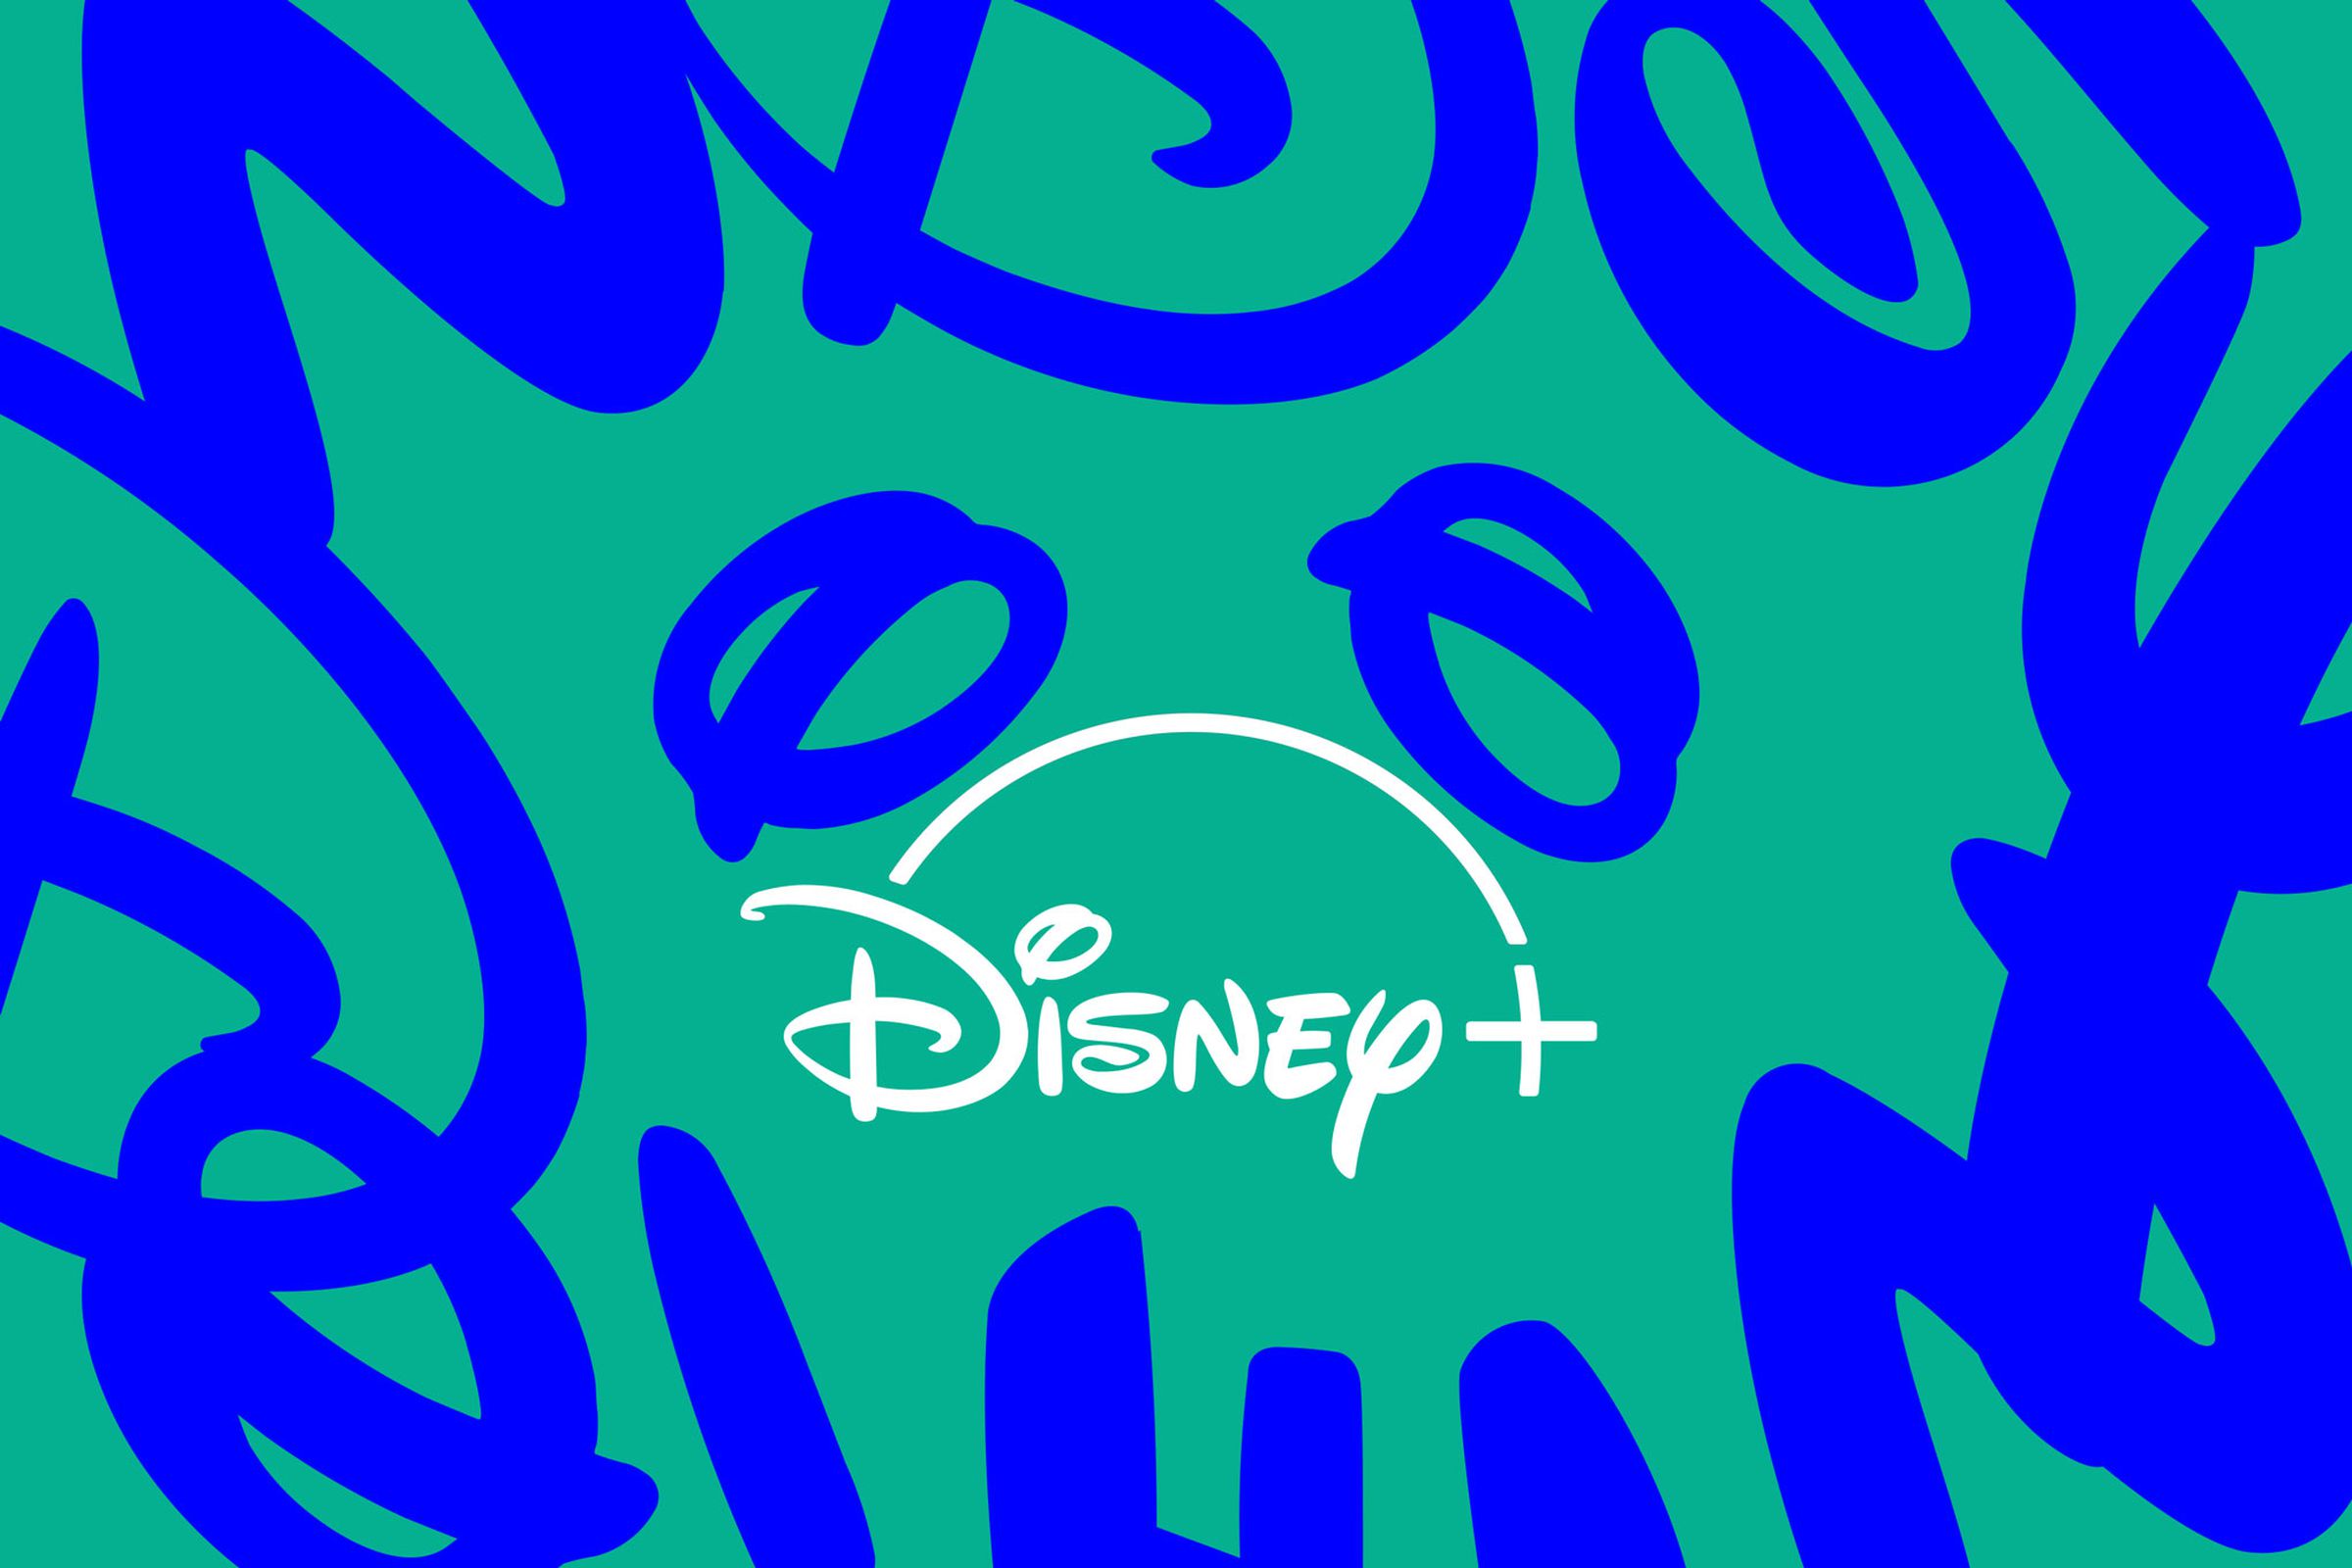 Image showing the Disney Plus logo, with two scribbles forming Mickey Mouse ears. The background is teal, with blue squiggles around the edge.